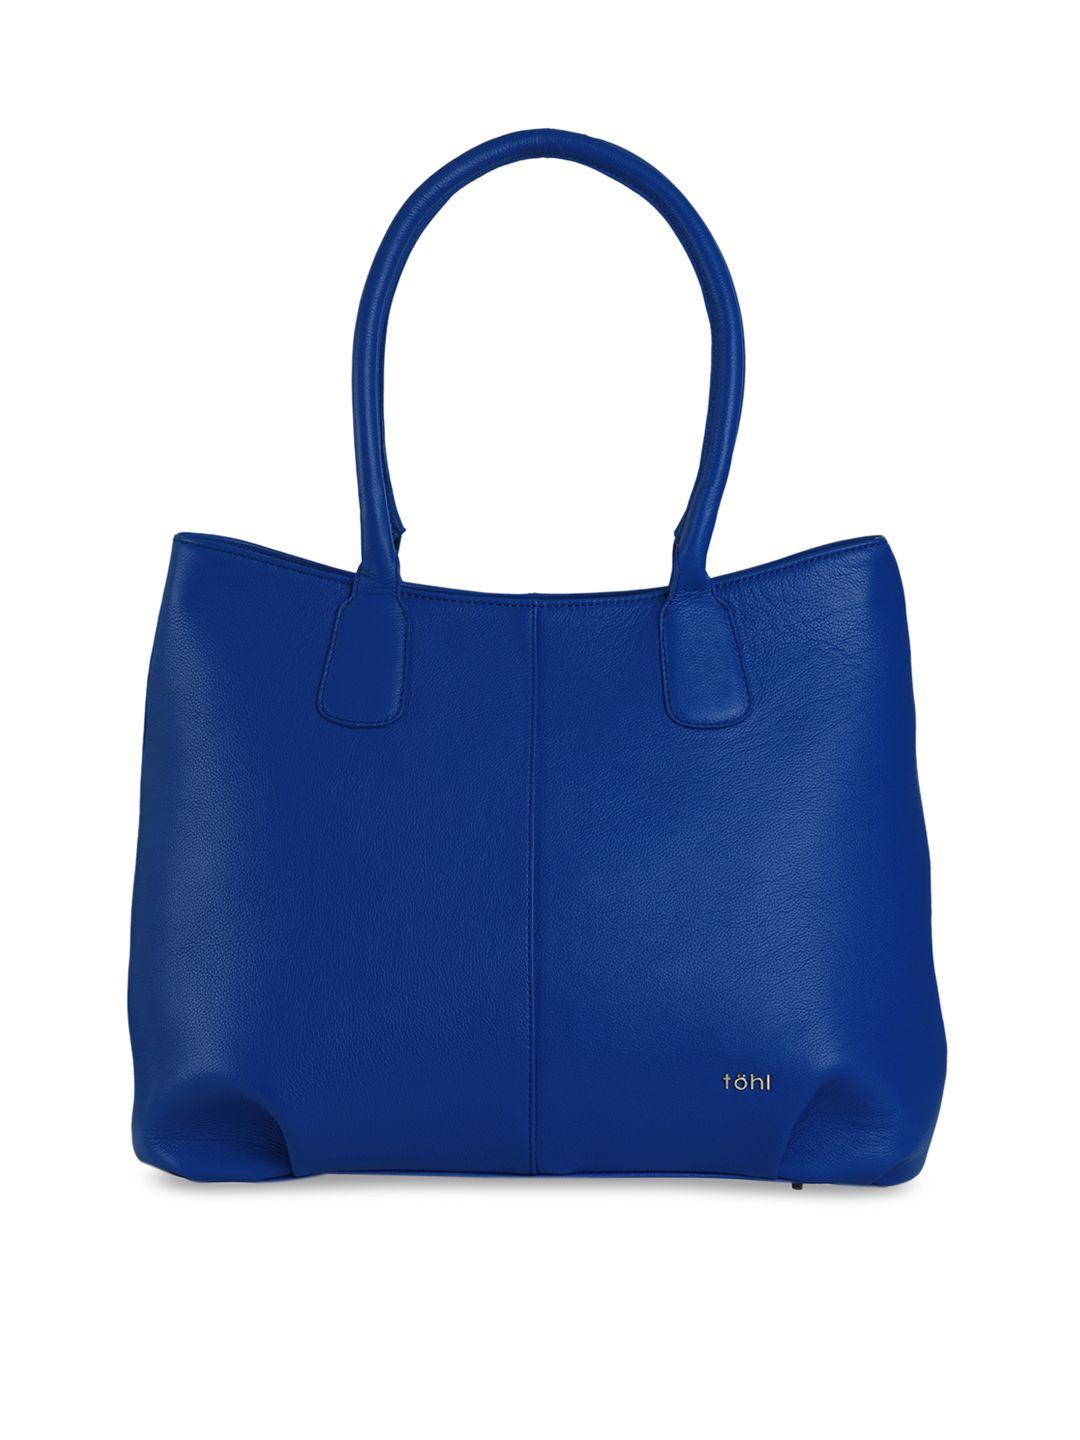 tohl blue solid tote bag